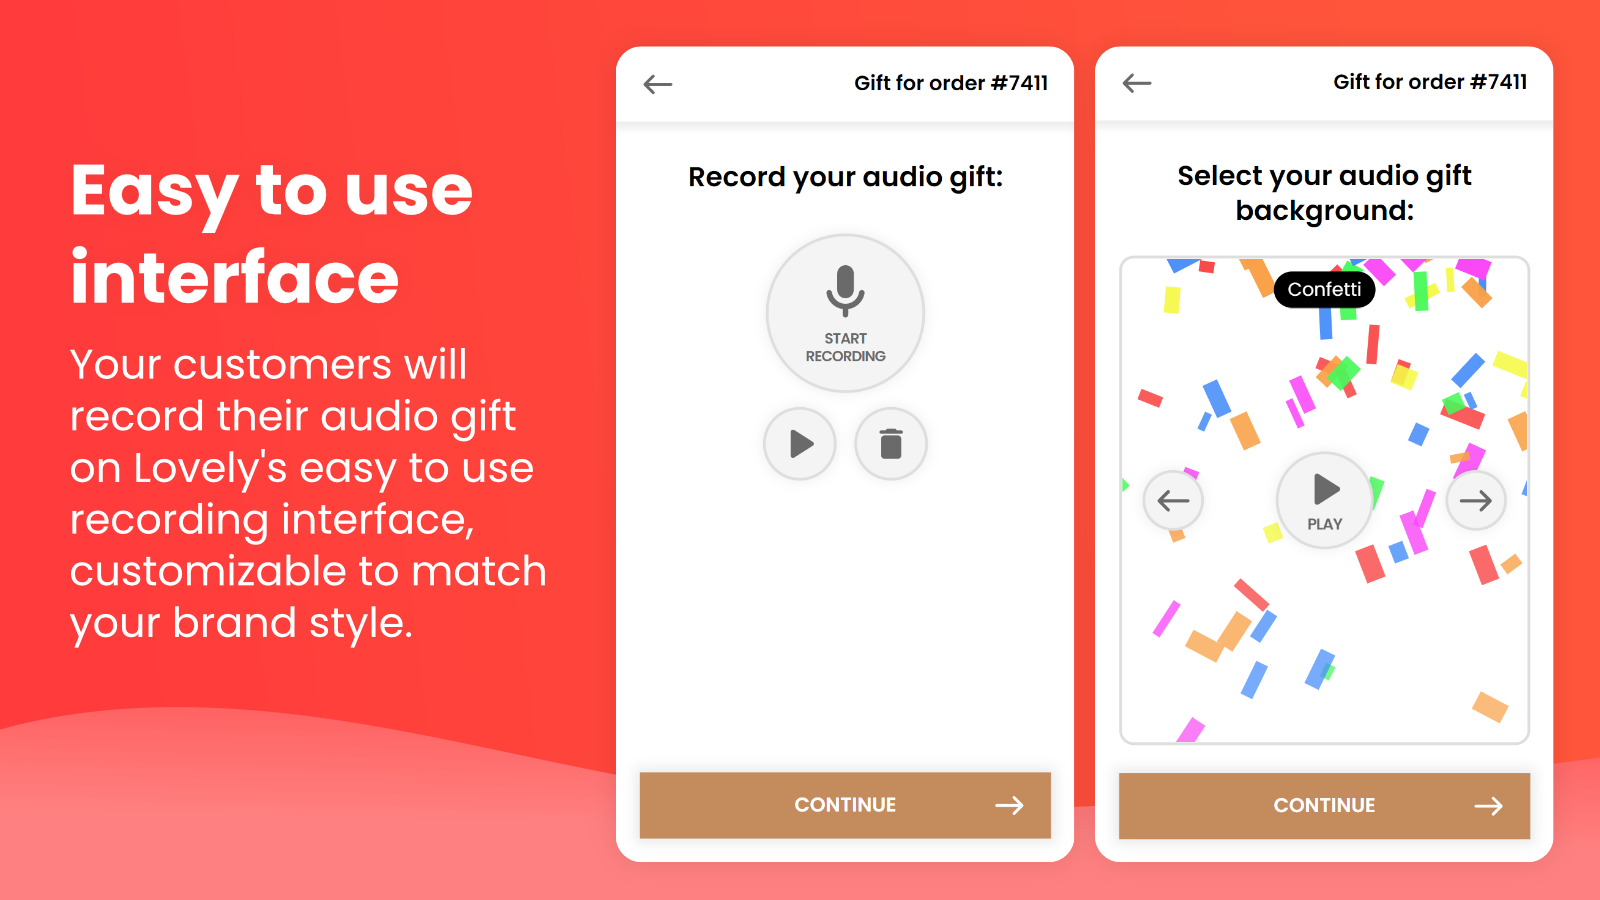 Lovely's easy to use interface for customers to record